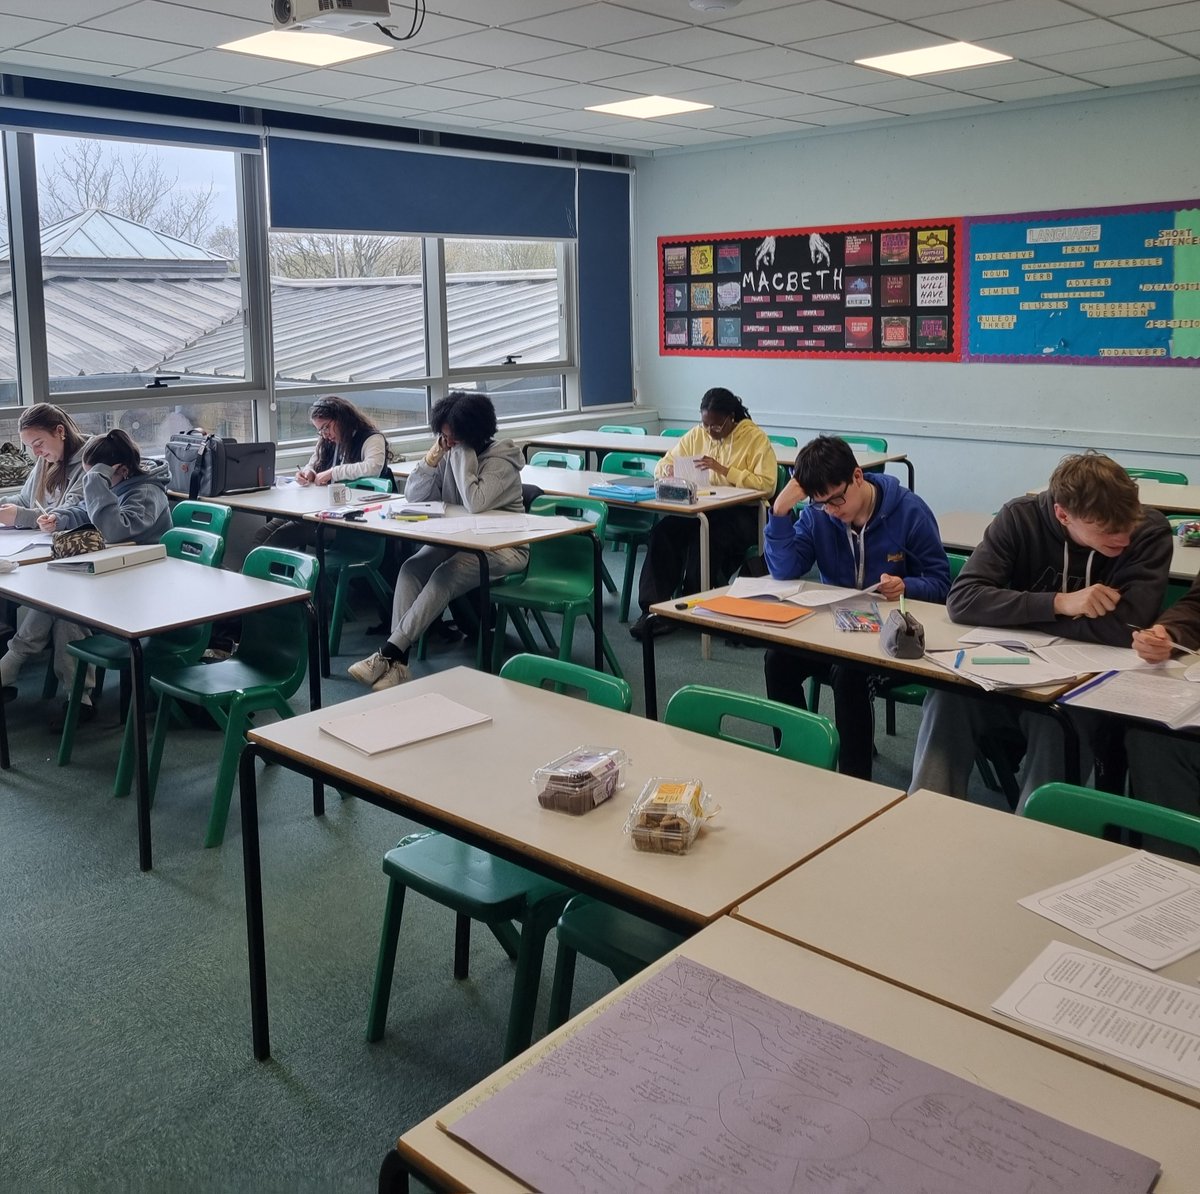 Sixth Formers hard at revision at Abbey Grange this Easter. #workethic #revision